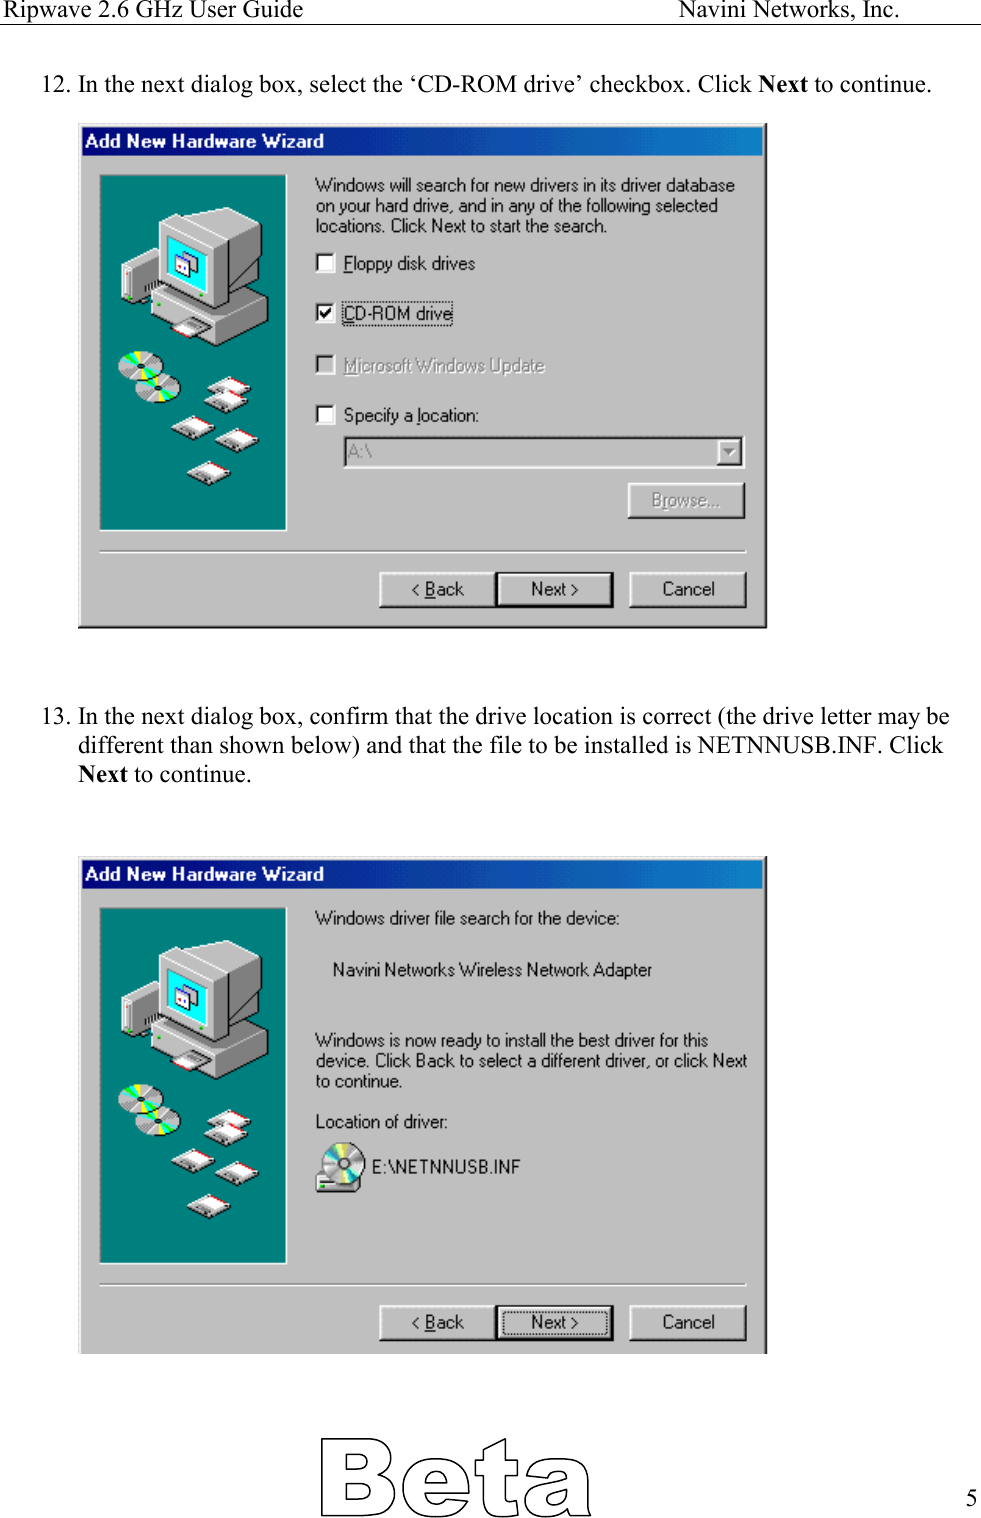 Ripwave 2.6 GHz User Guide                                                            Navini Networks, Inc. 12. In the next dialog box, select the ‘CD-ROM drive’ checkbox. Click Next to continue.                      13. In the next dialog box, confirm that the drive location is correct (the drive letter may be different than shown below) and that the file to be installed is NETNNUSB.INF. Click Next to continue.                          5